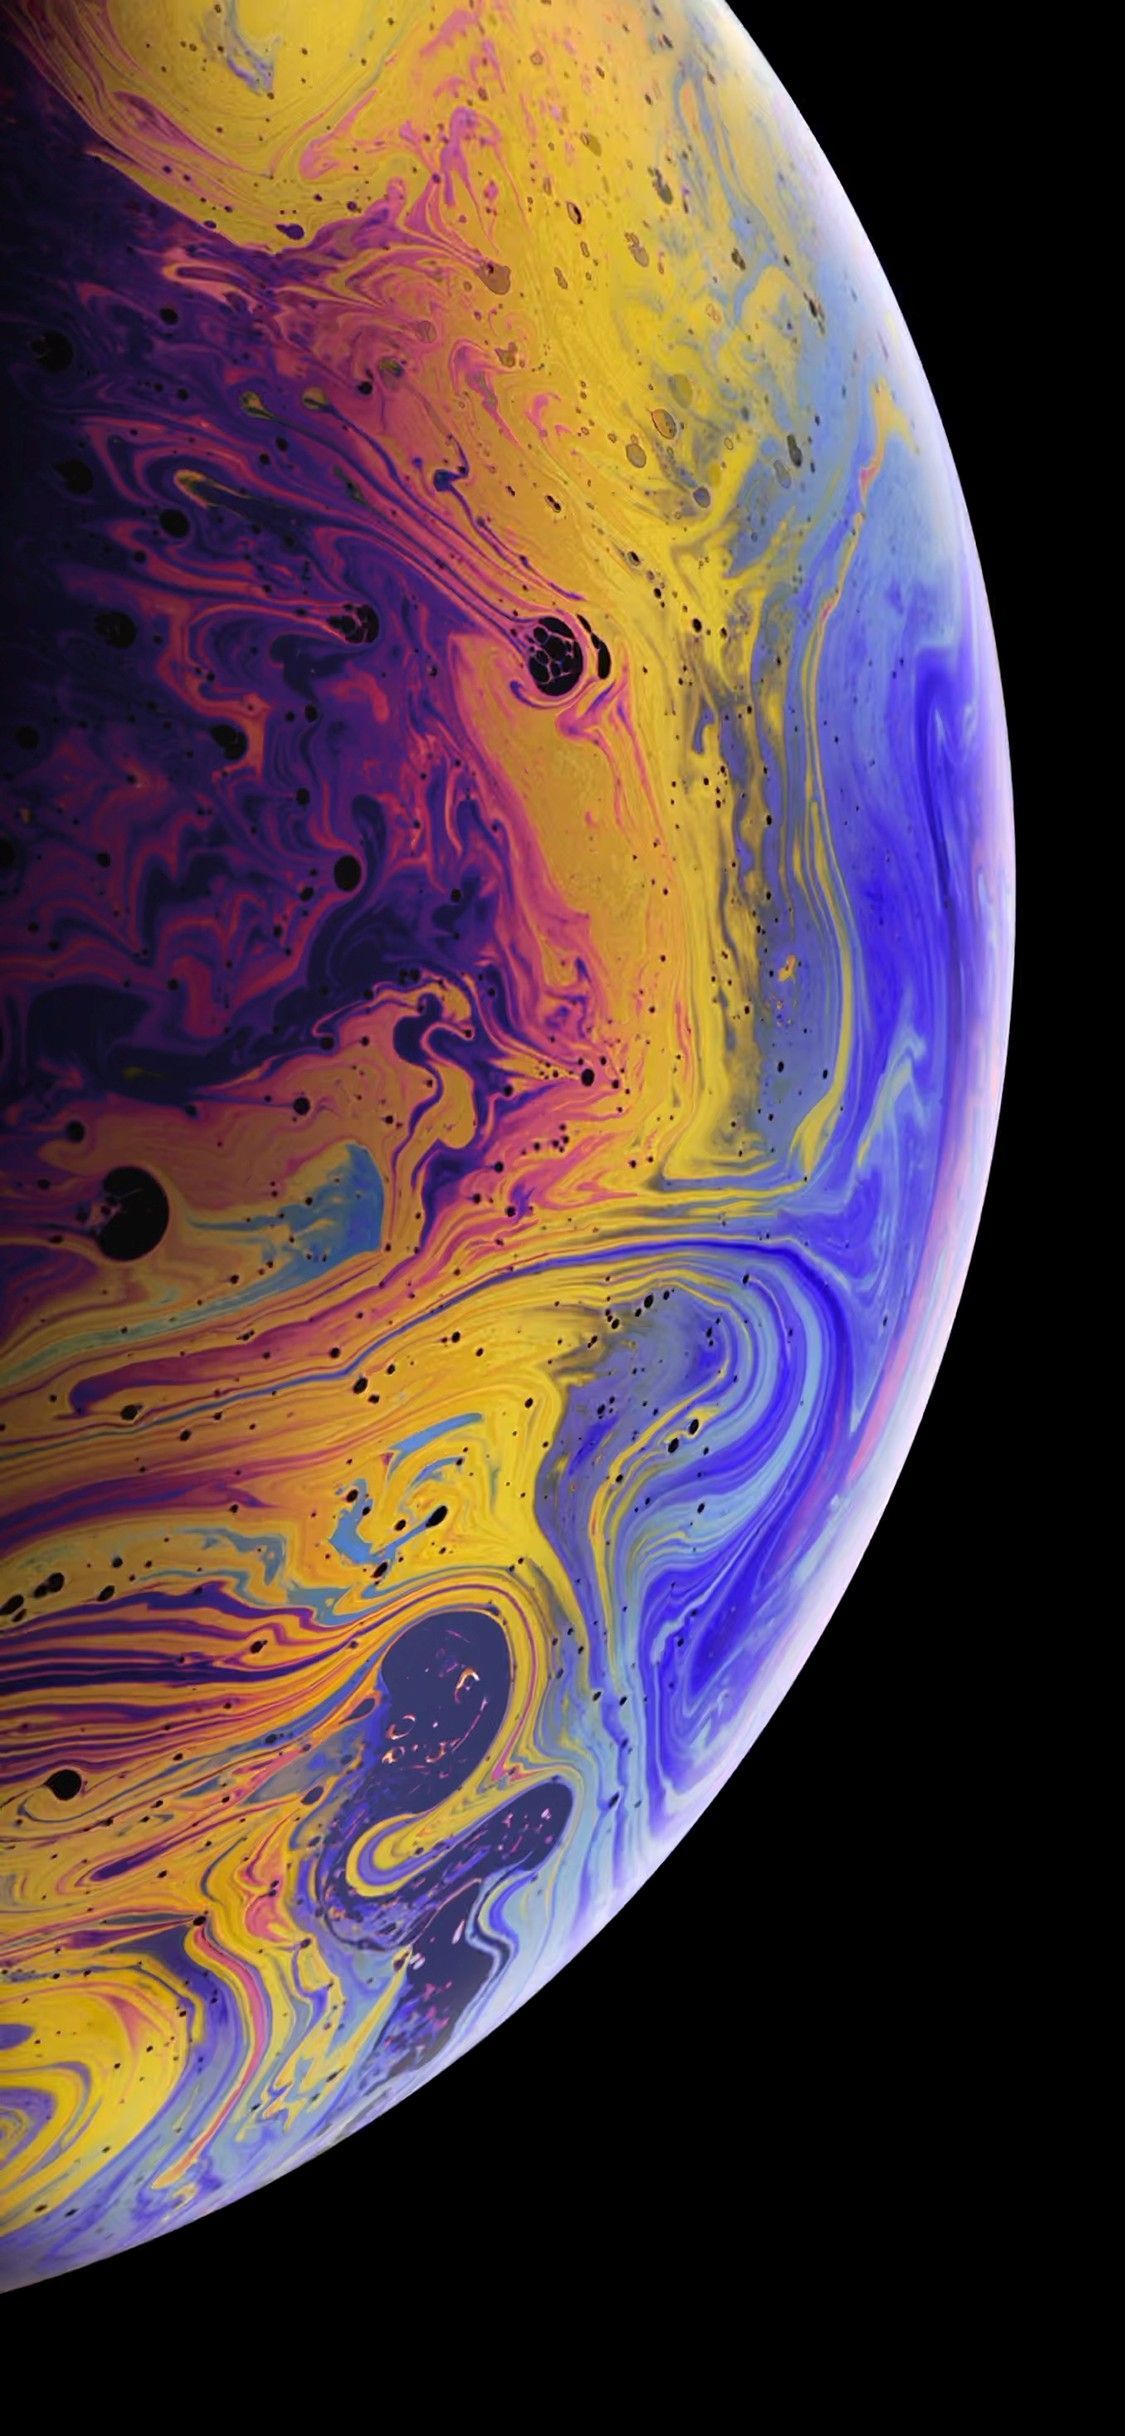 Planets Iphone Wallpaper Hd